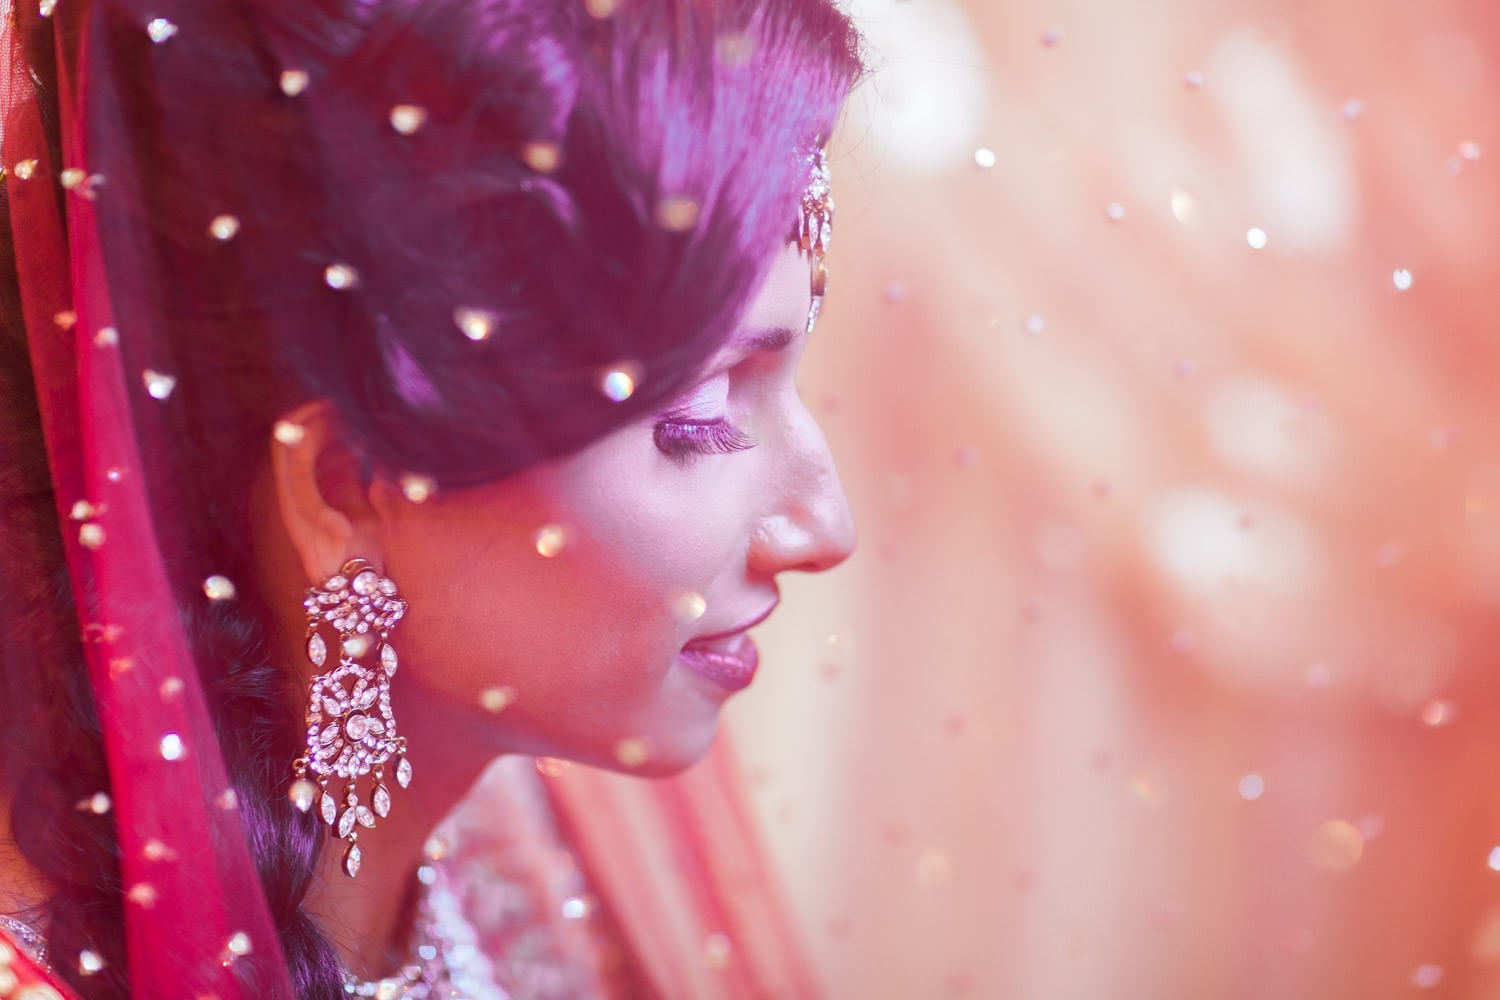 Indian bride getting ready for wedding | Vancouver Indian wedding photographer